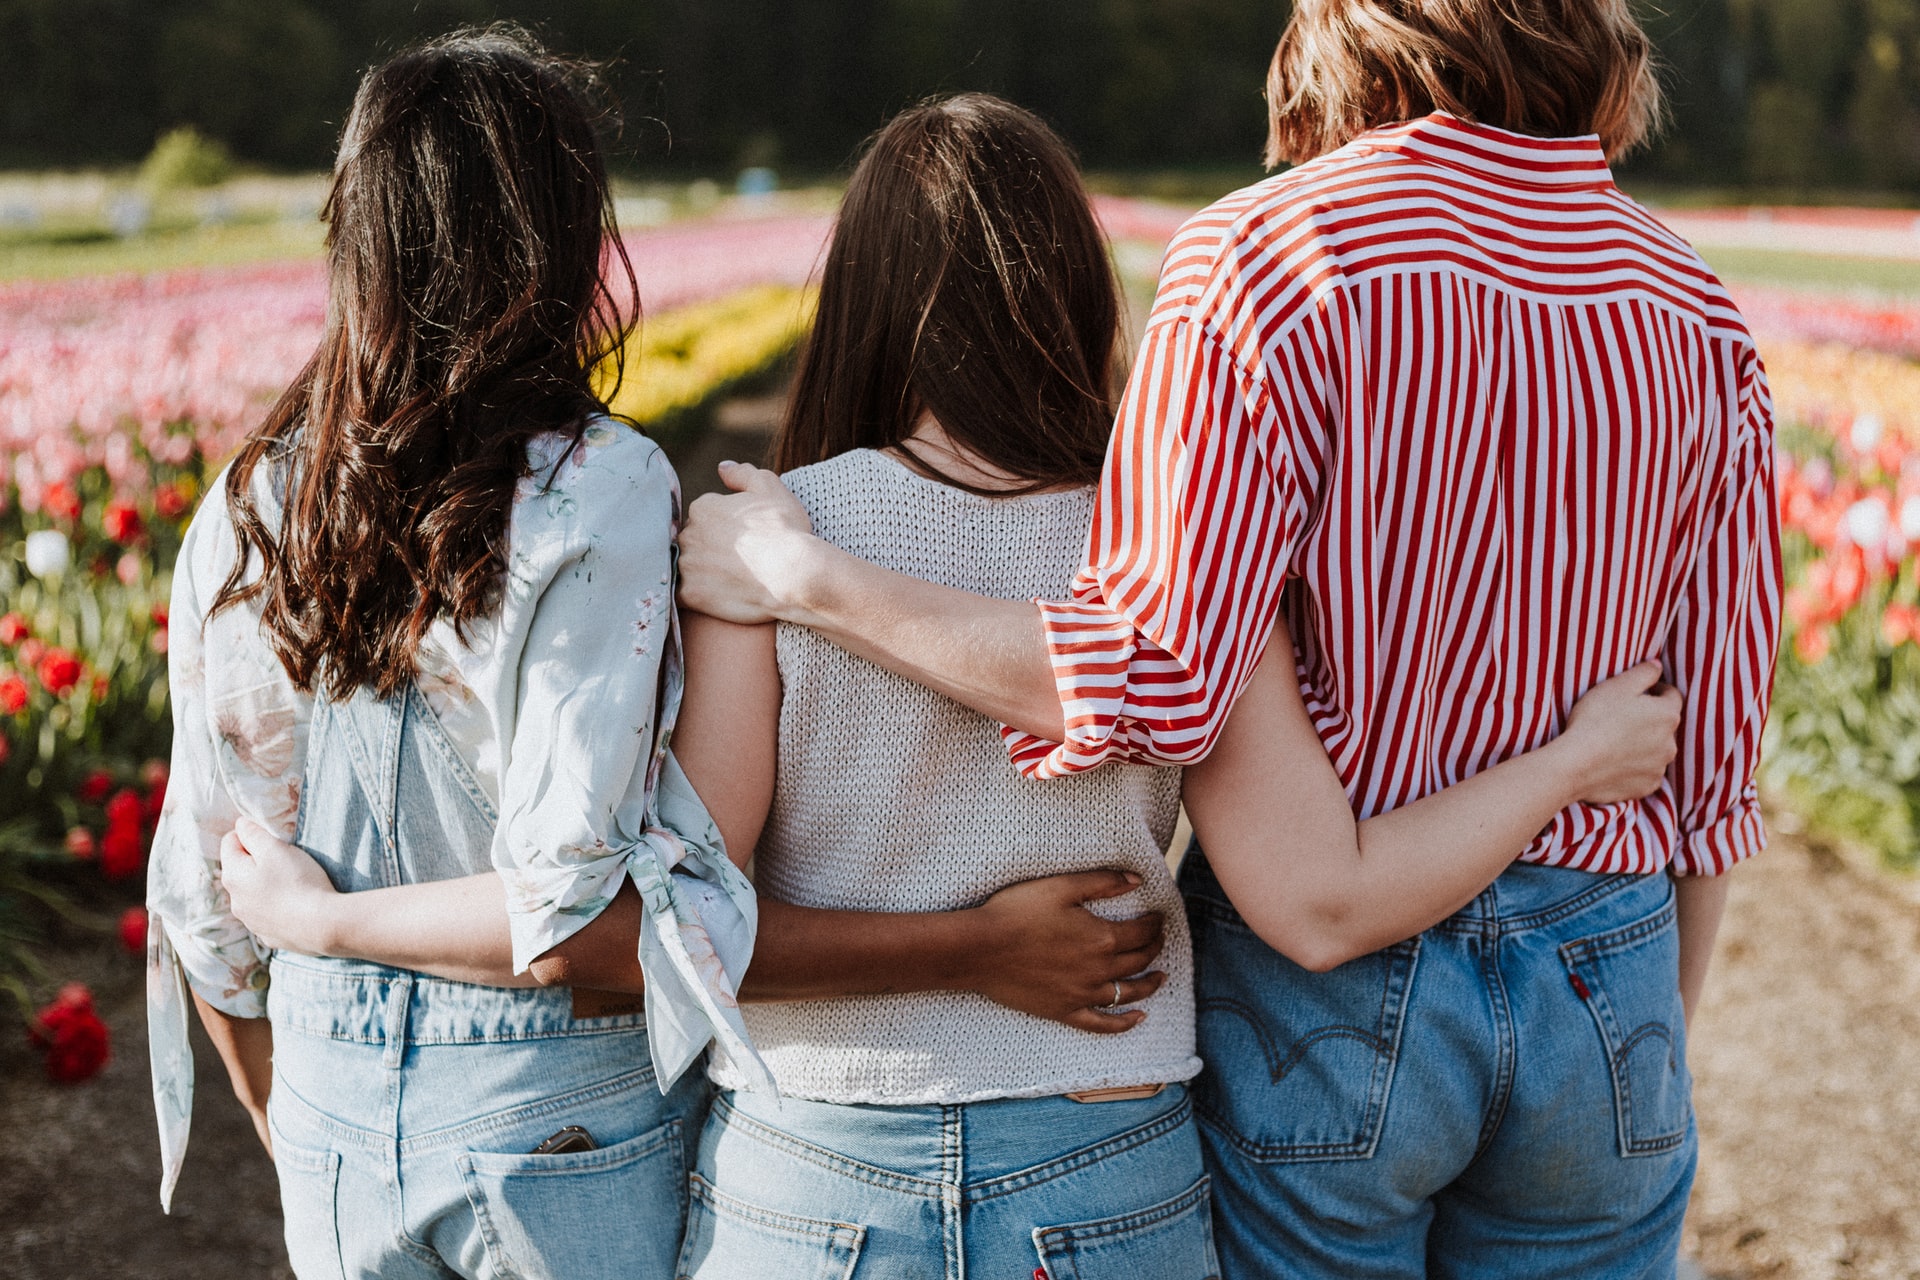 3 friends standing in a field with their arms around each other